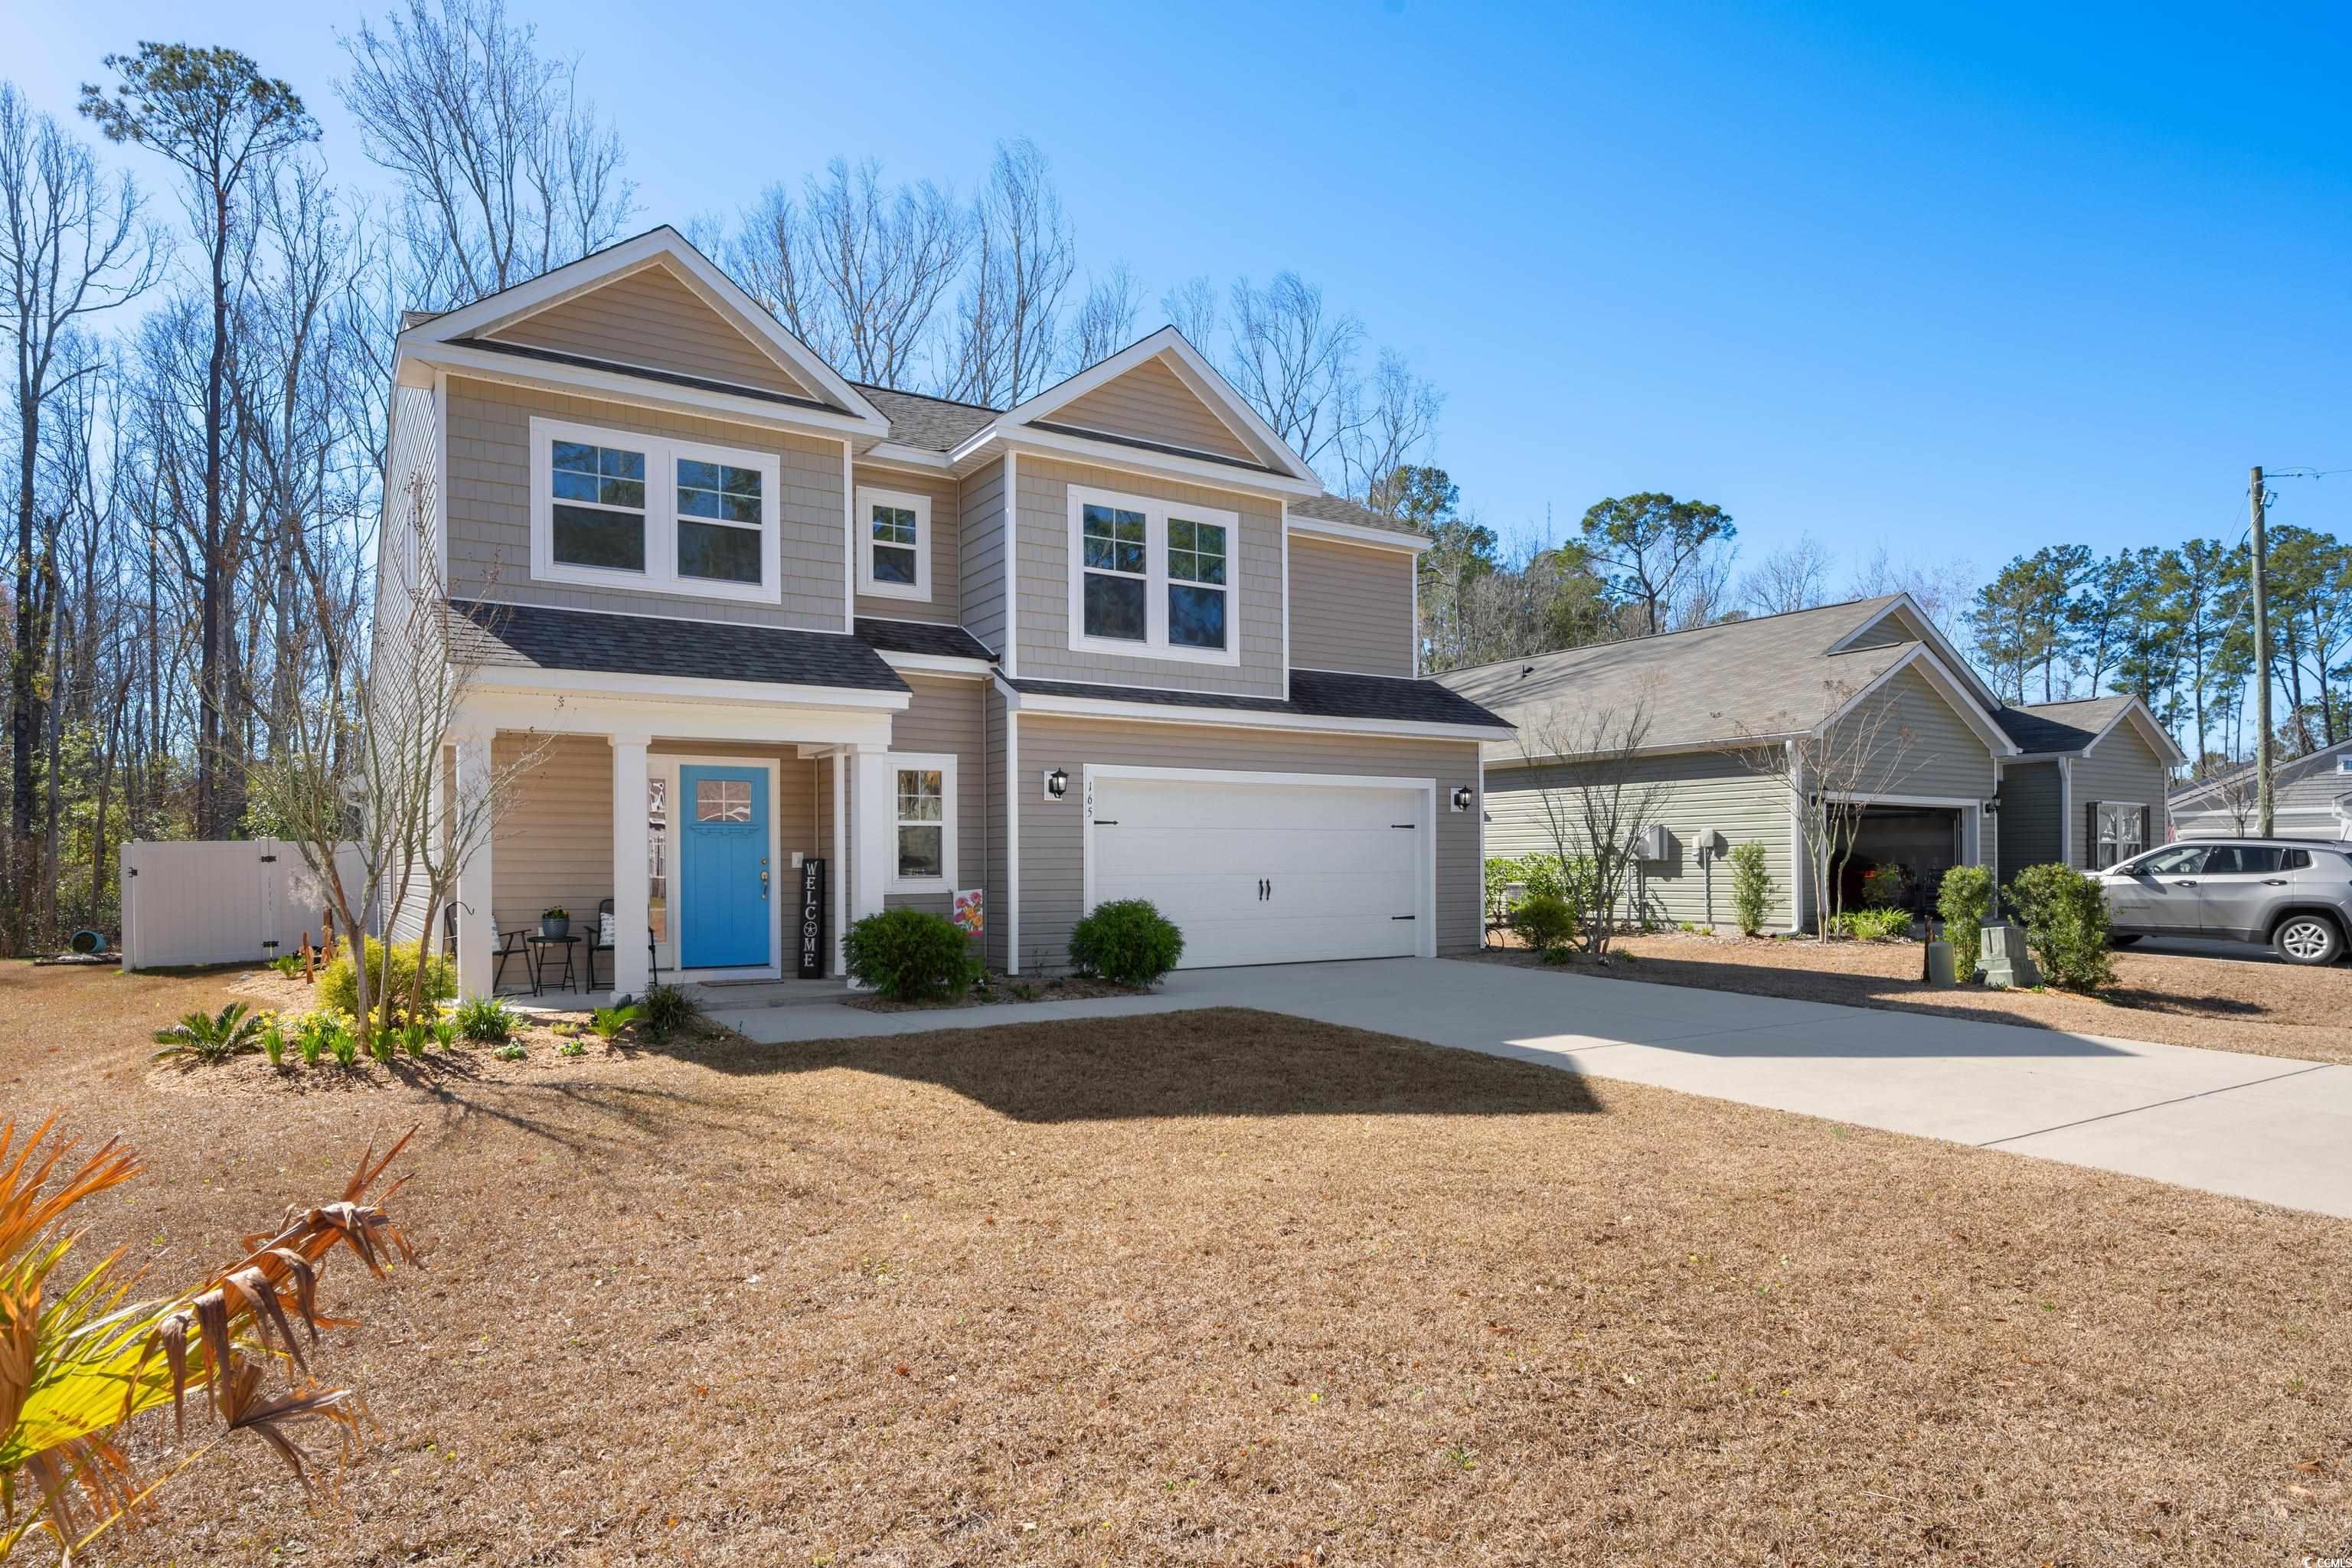 165 Clearwater Dr. Pawleys Island, SC 29585